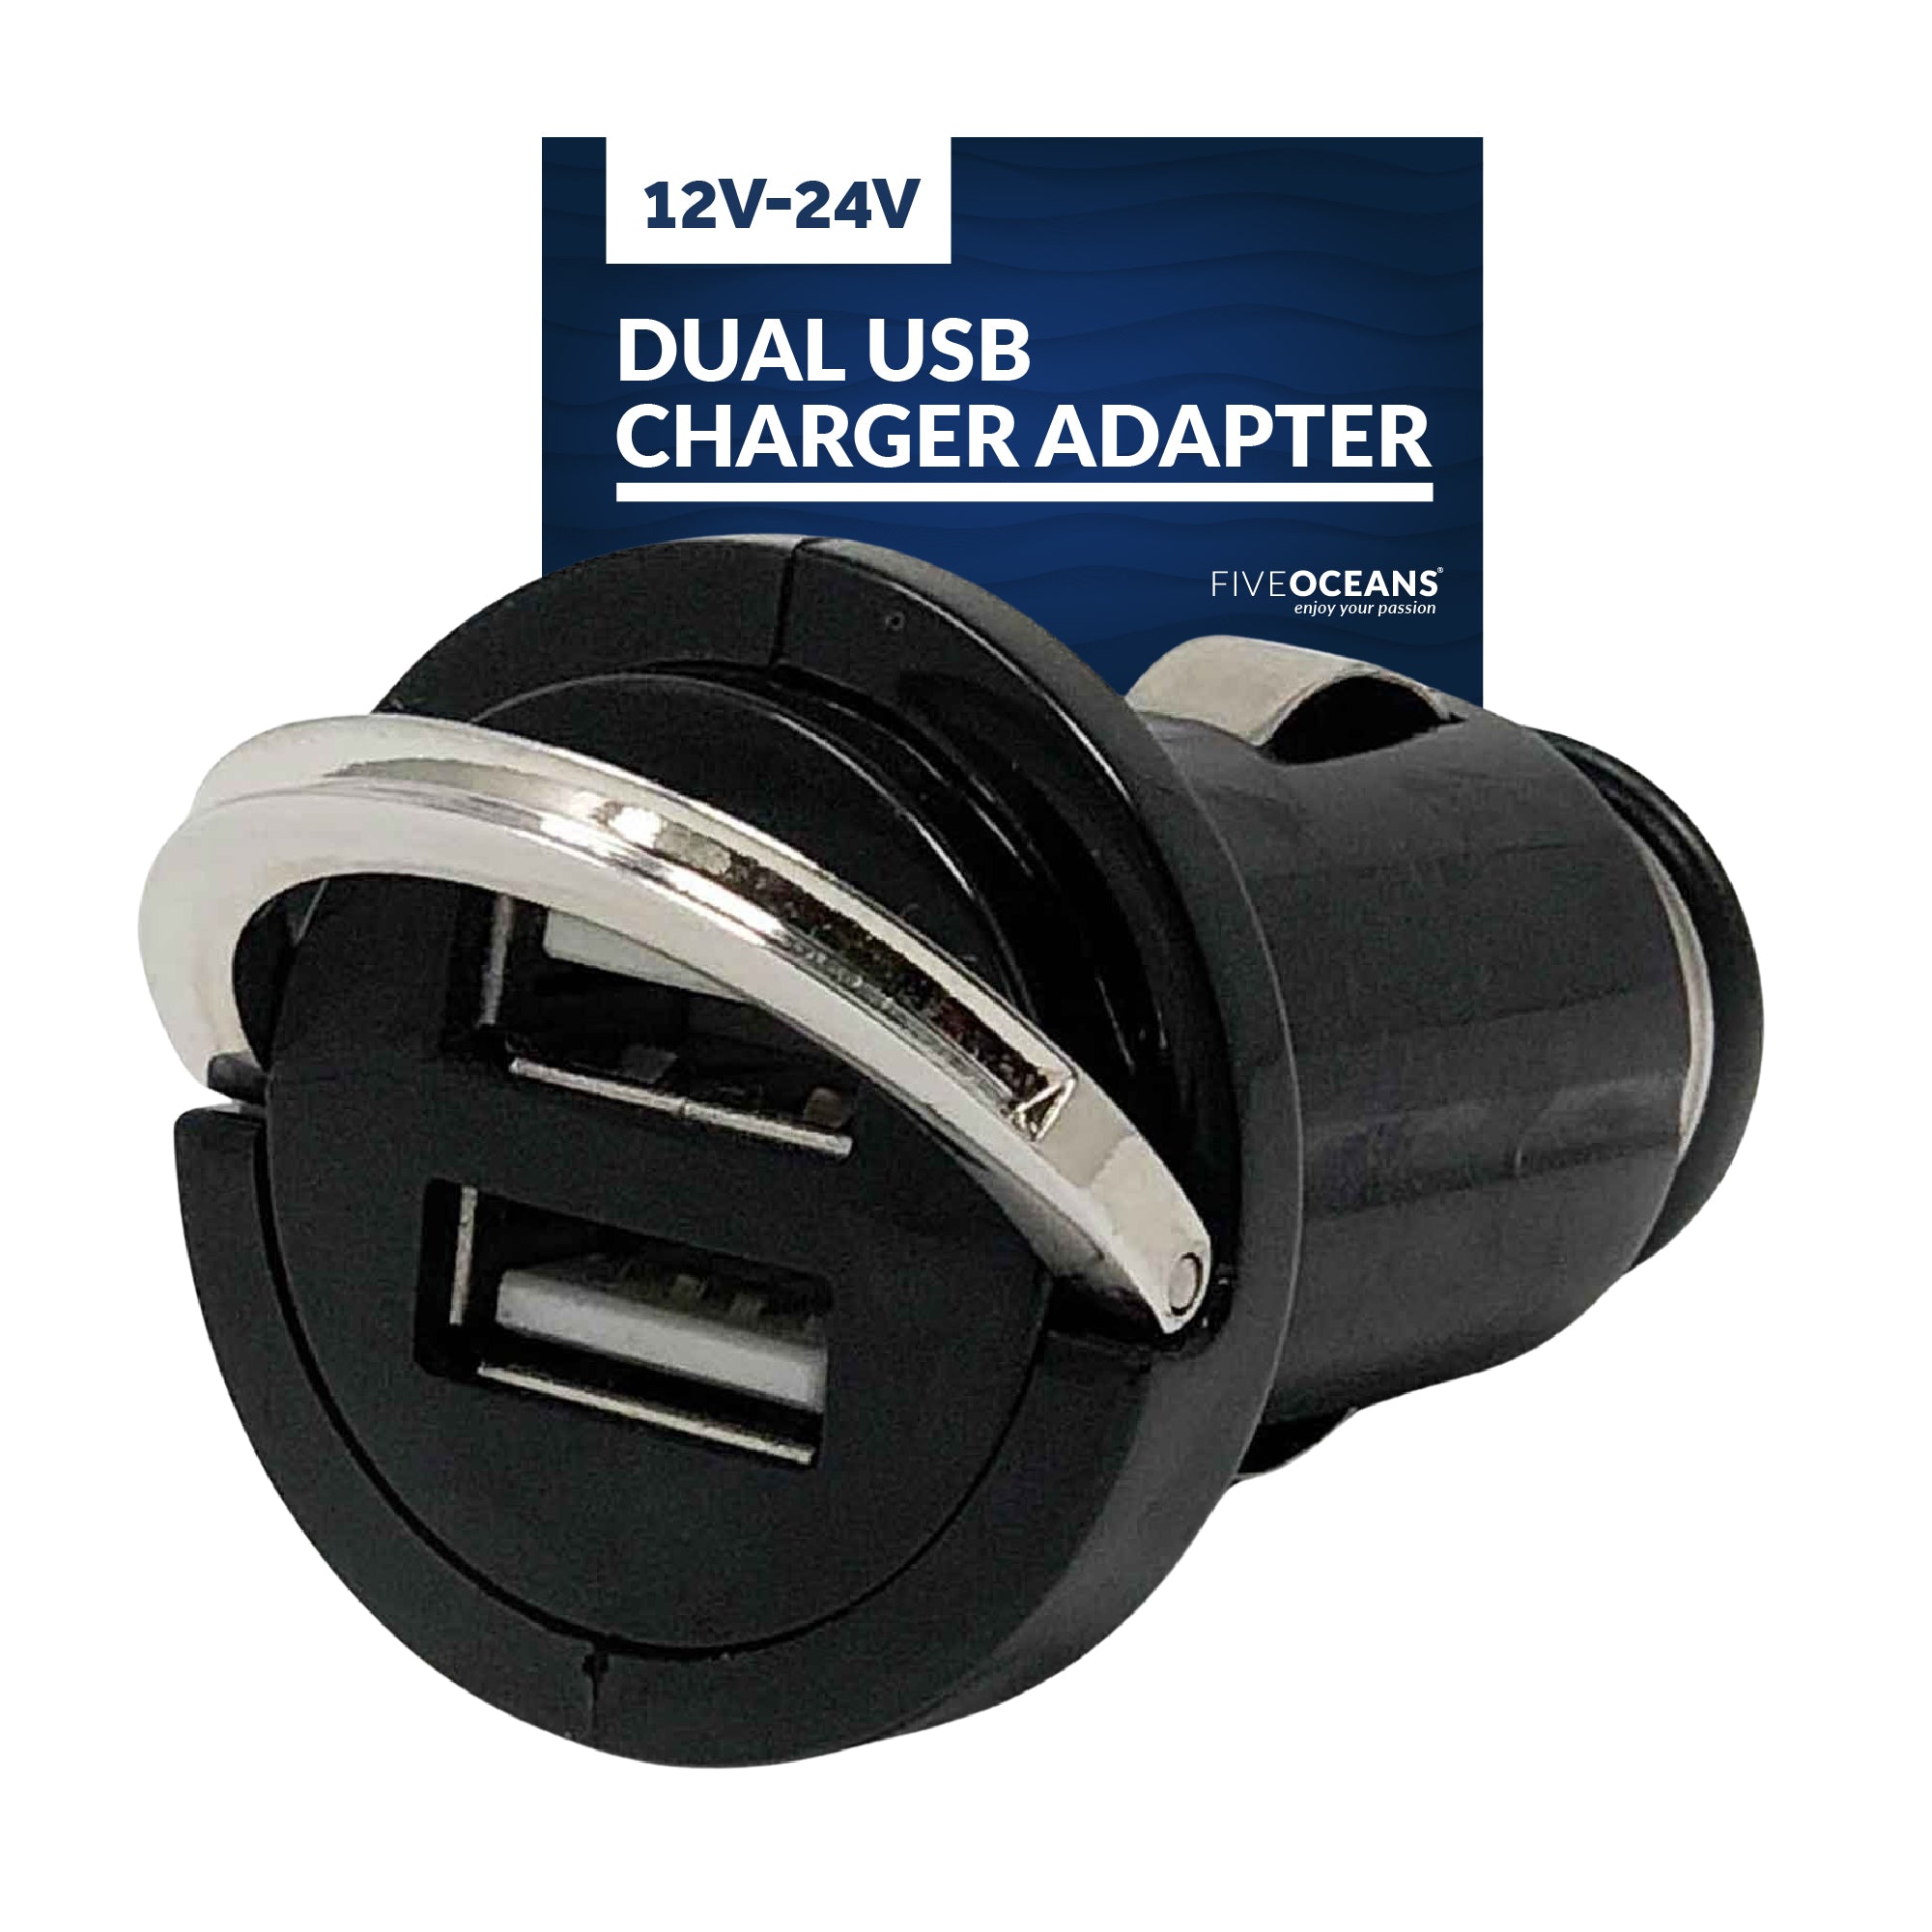 Dual USB Charger Adapter, 12V-24 V - FO3735